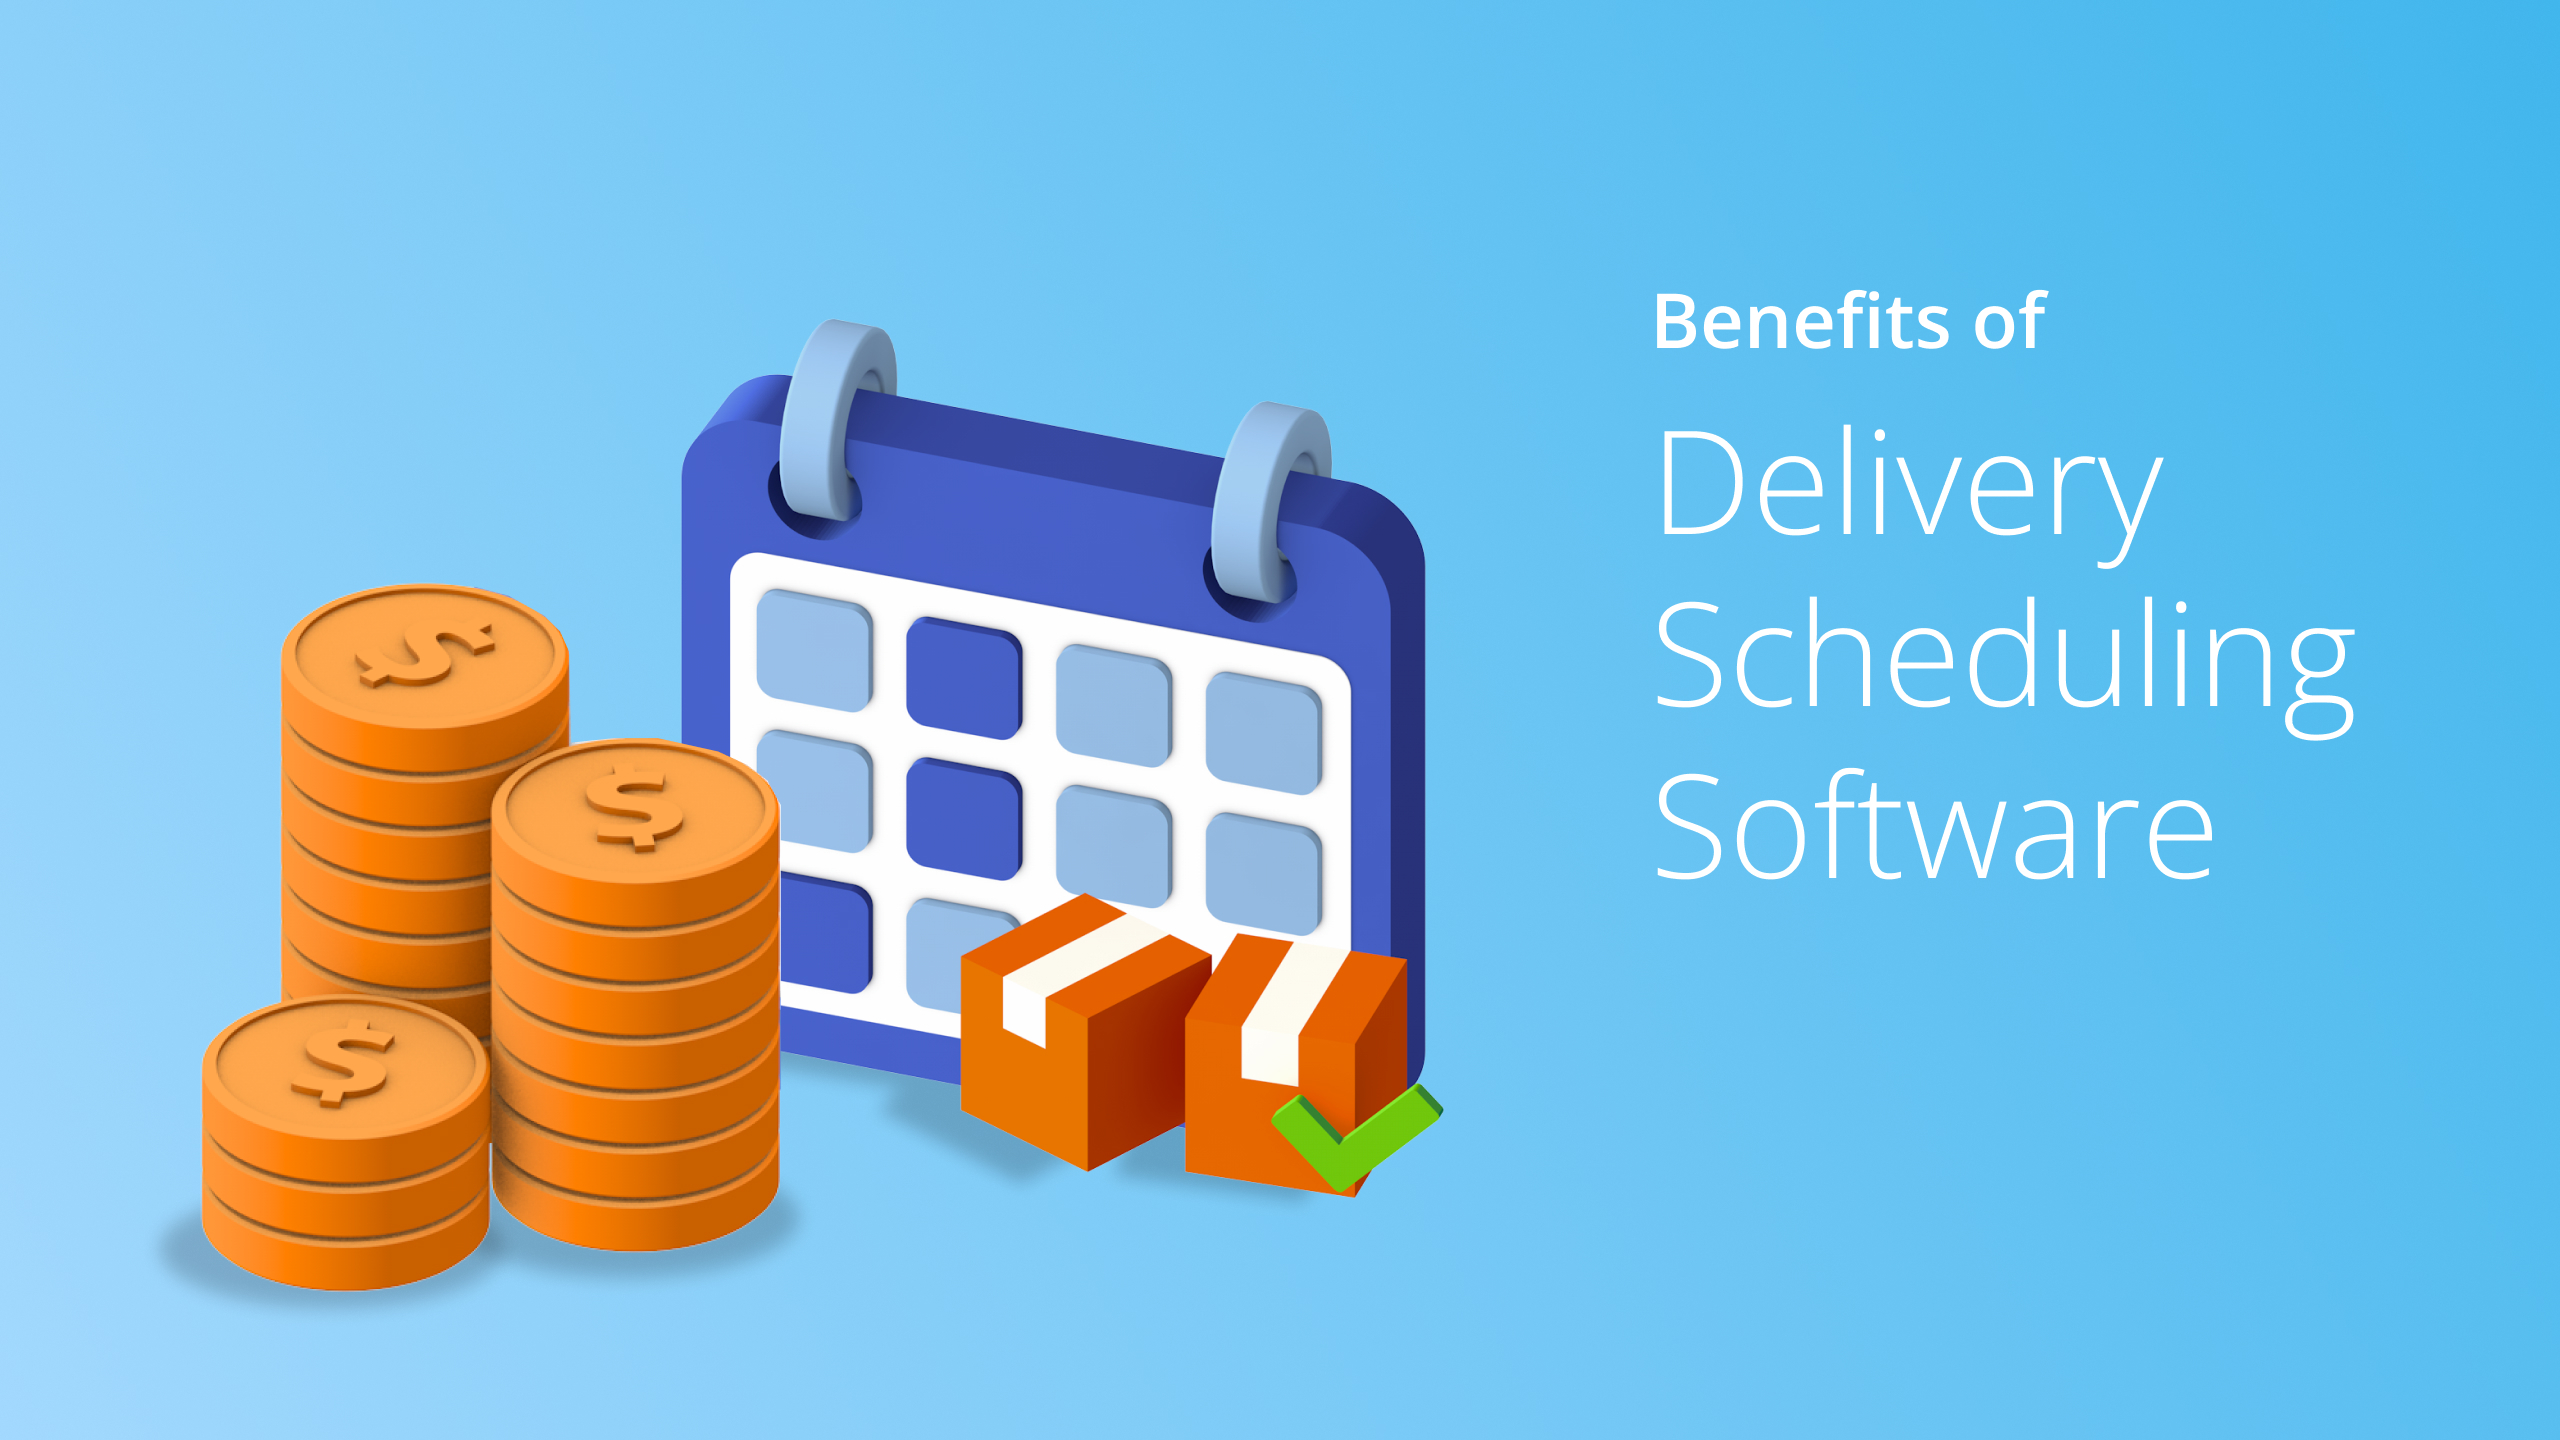 delivery scheduling software concept and the benefits of it